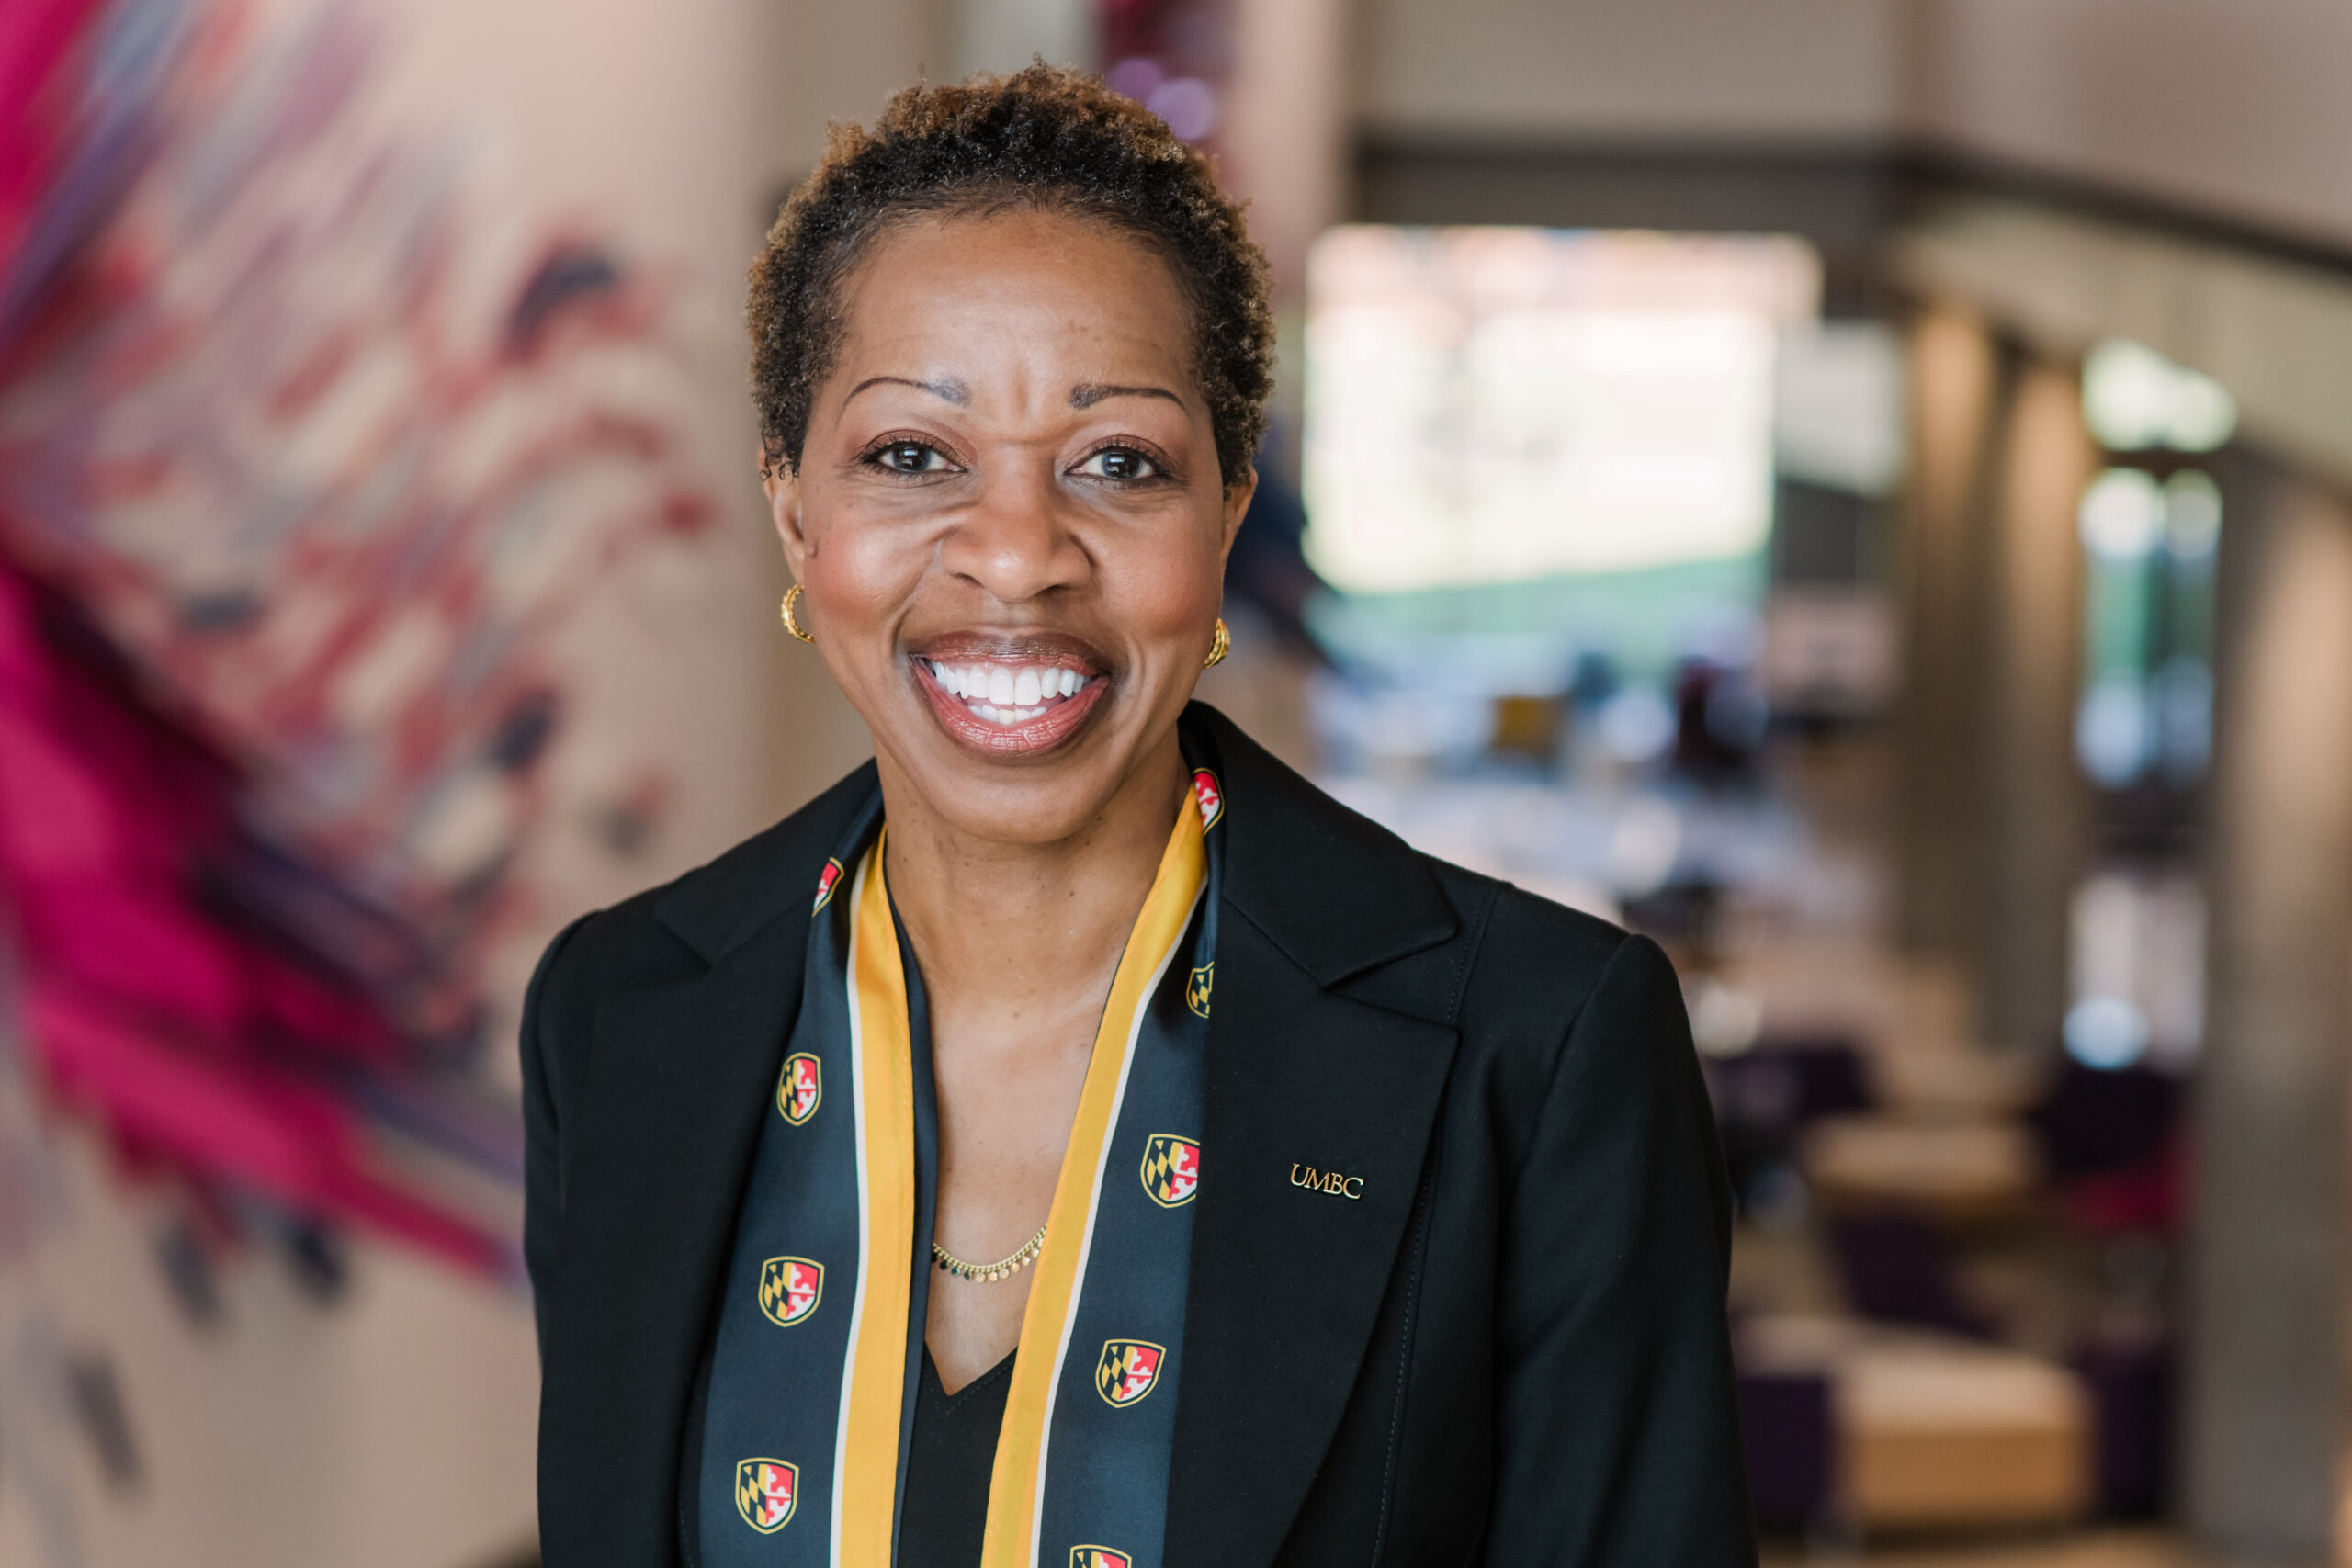 Let’s celebrate! UMBC marks the inauguration of President Valerie Sheares Ashby with community events, April 18 – 27